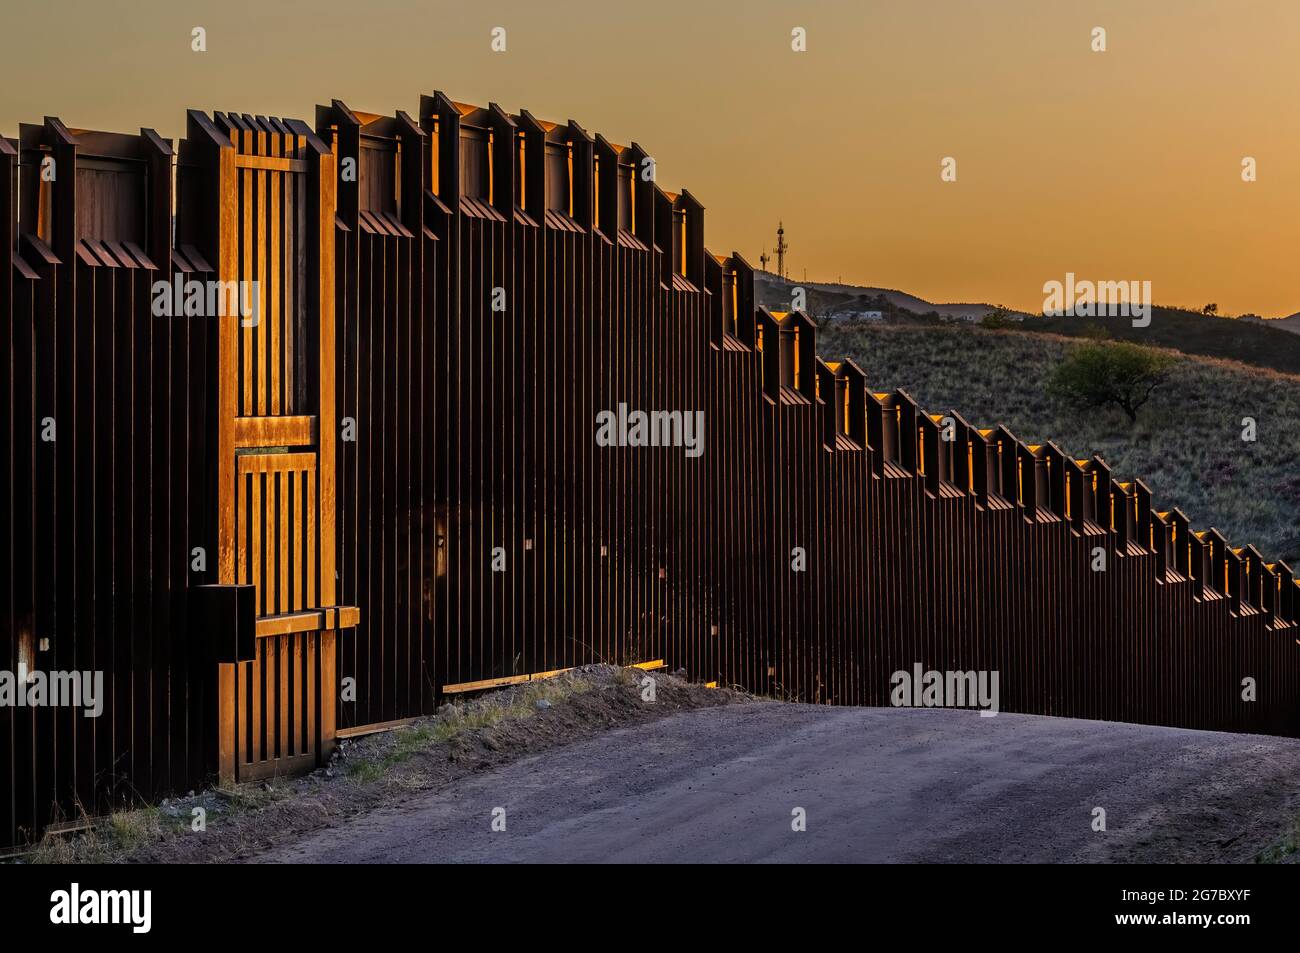 Image shows US border fence on the Mexico border, east of Nogales Arizona and Nogales Sonora Mexico, viewed from US side looking souhwest.This type of Stock Photo